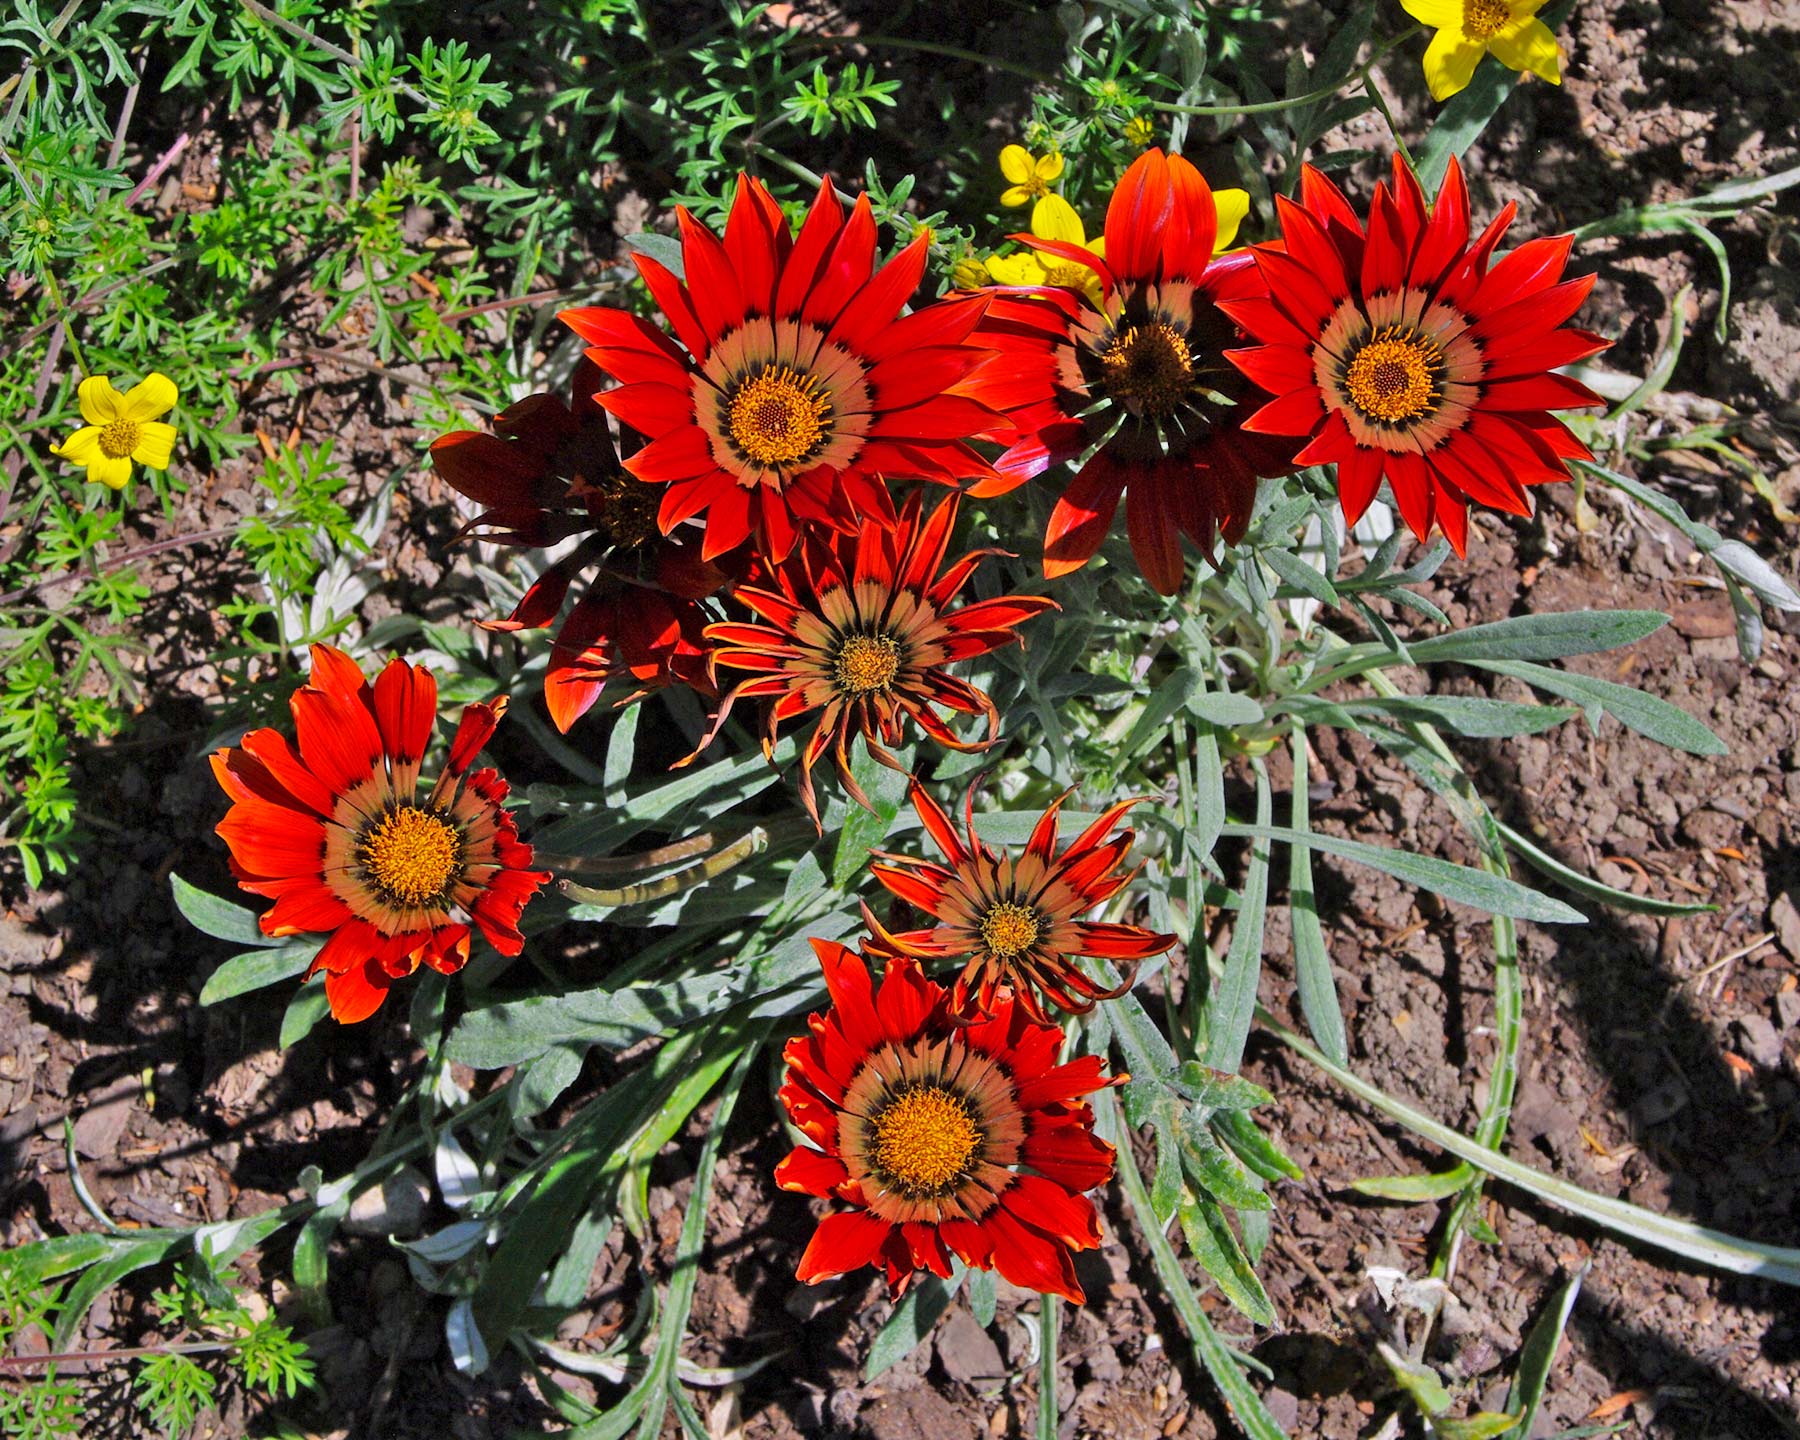 Gazania hybrids - great bedding or patio plant - bright coloured flowers most of summer